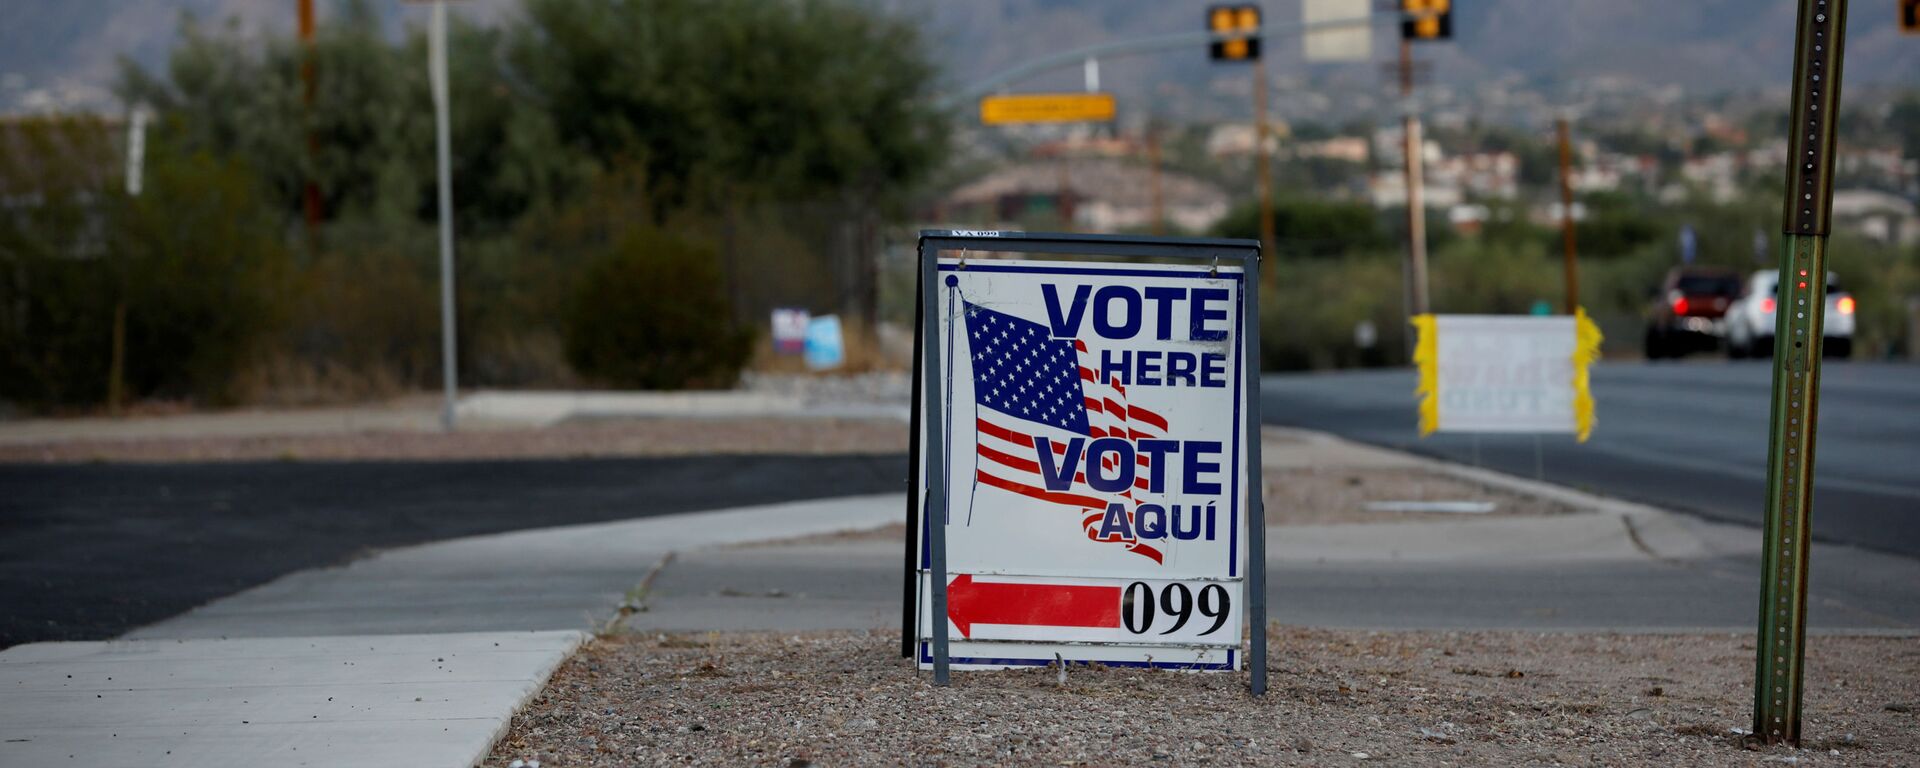 Sign directs voters to a polling station on Election Day in Tucson, Arizona, U.S. November 3, 2020 - Sputnik International, 1920, 18.10.2021